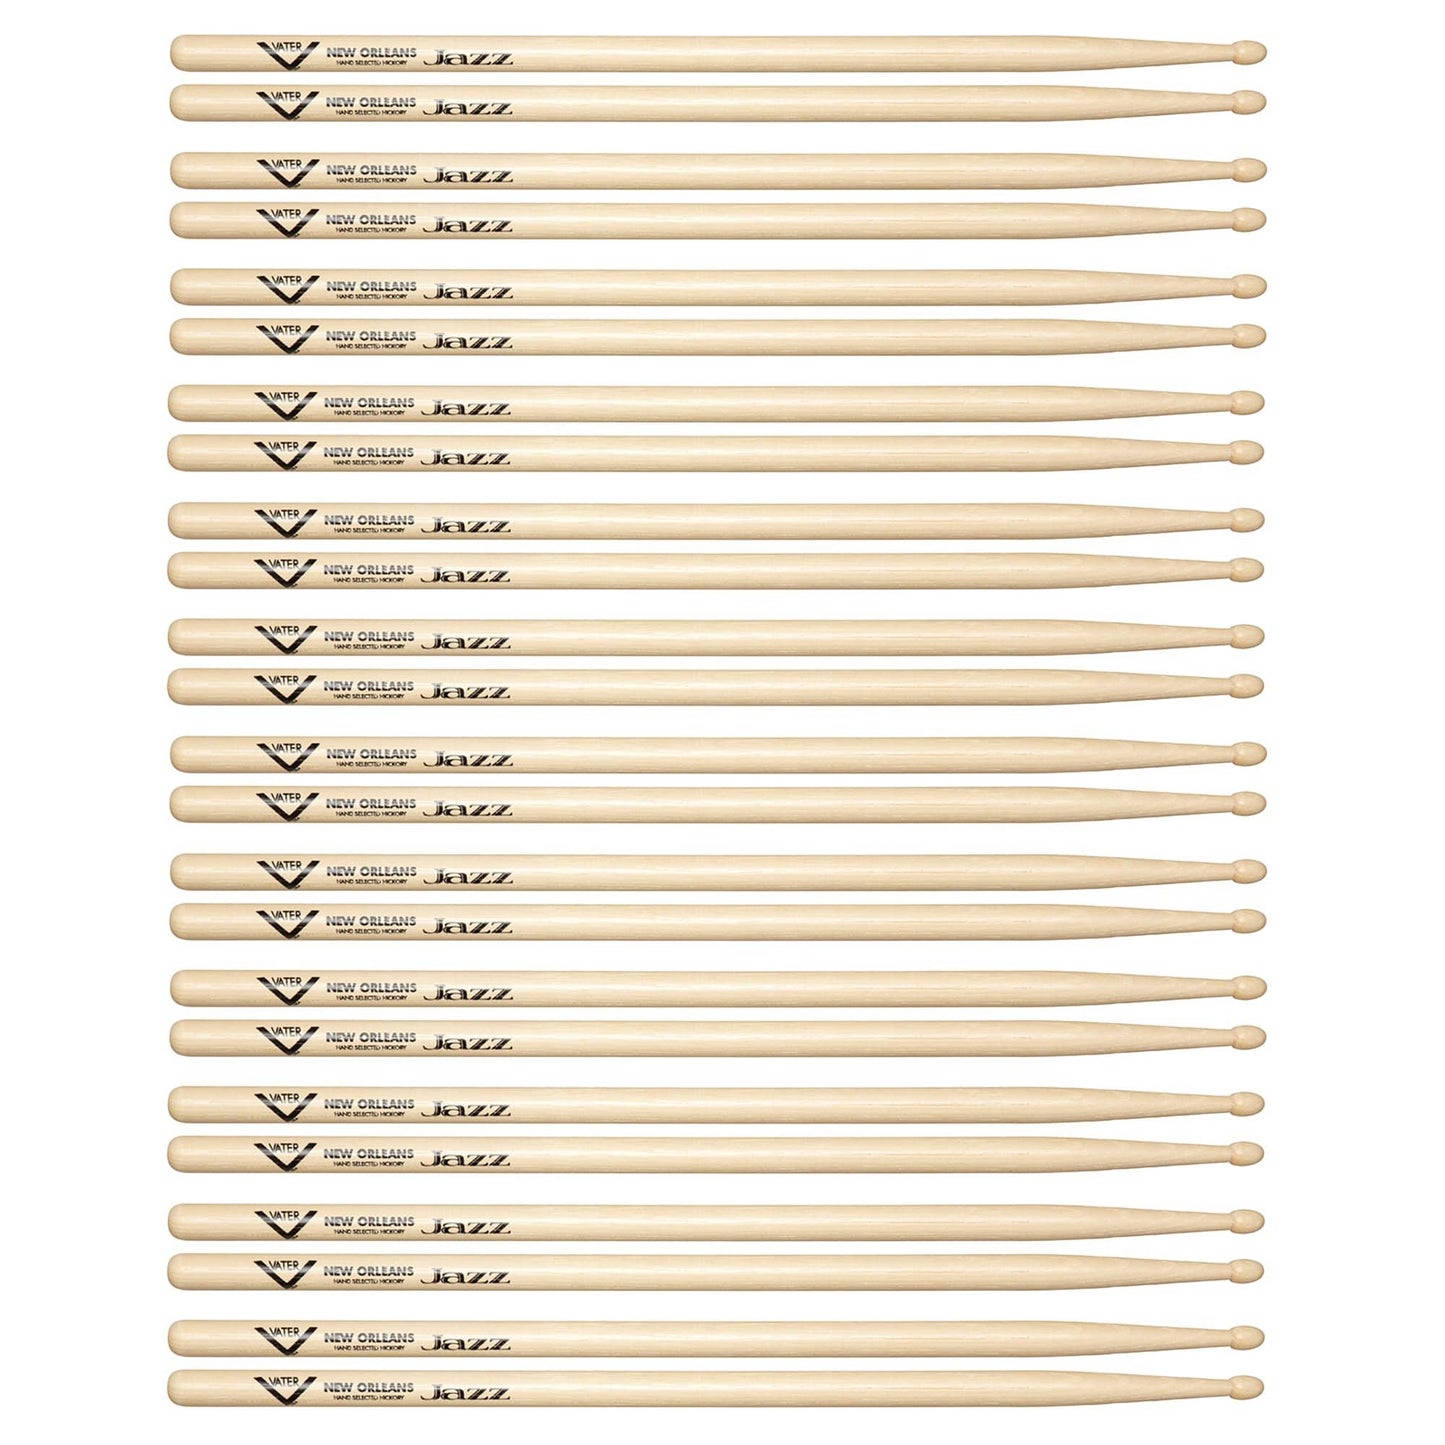 Vater Hickory New Orleans Jazz Wood Tip Drum Sticks (12 Pair Bundle) Drums and Percussion / Parts and Accessories / Drum Sticks and Mallets